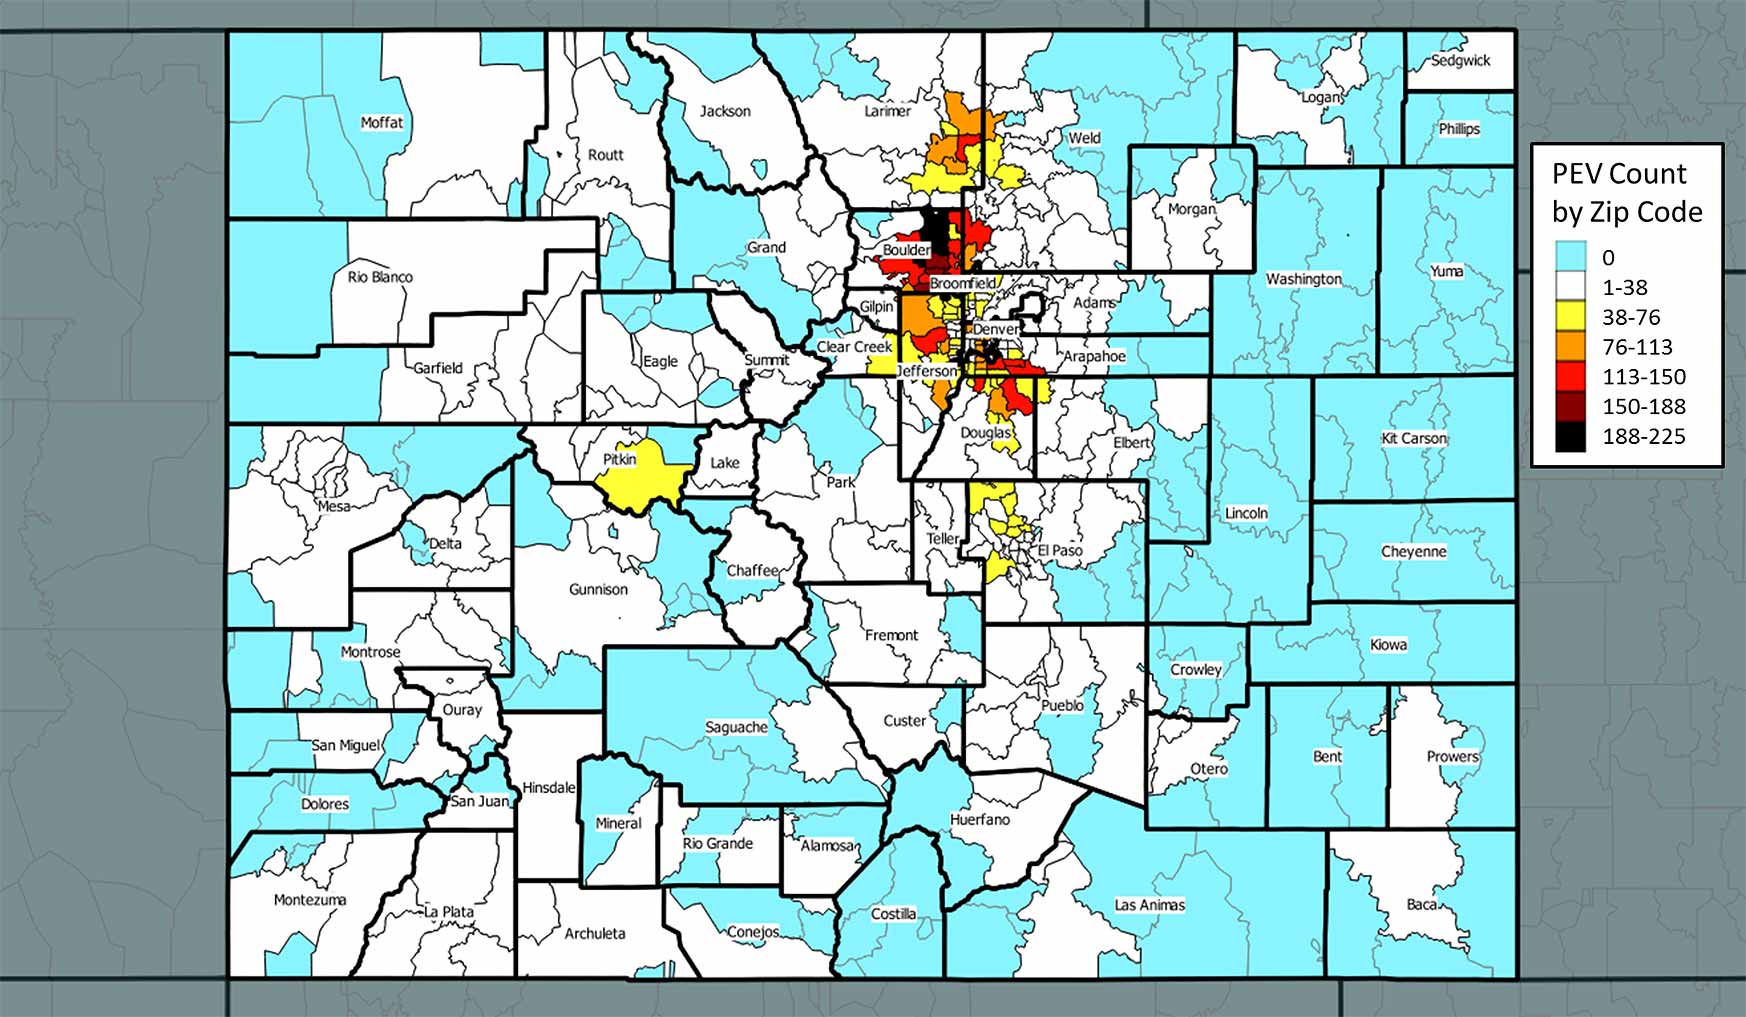 Image of Colorado map identifying approximate number electric vehicles per county, with the highest densities in Boulder County with 1,600; Denver County with 1,100; Jefferson County with 1,100;  Arapahoe County with 1,000; Douglas County with 800; Larimer County with 700, El Paso County with 700; Adams County with 500; Weld County with 300; and Broomfield County with 200.